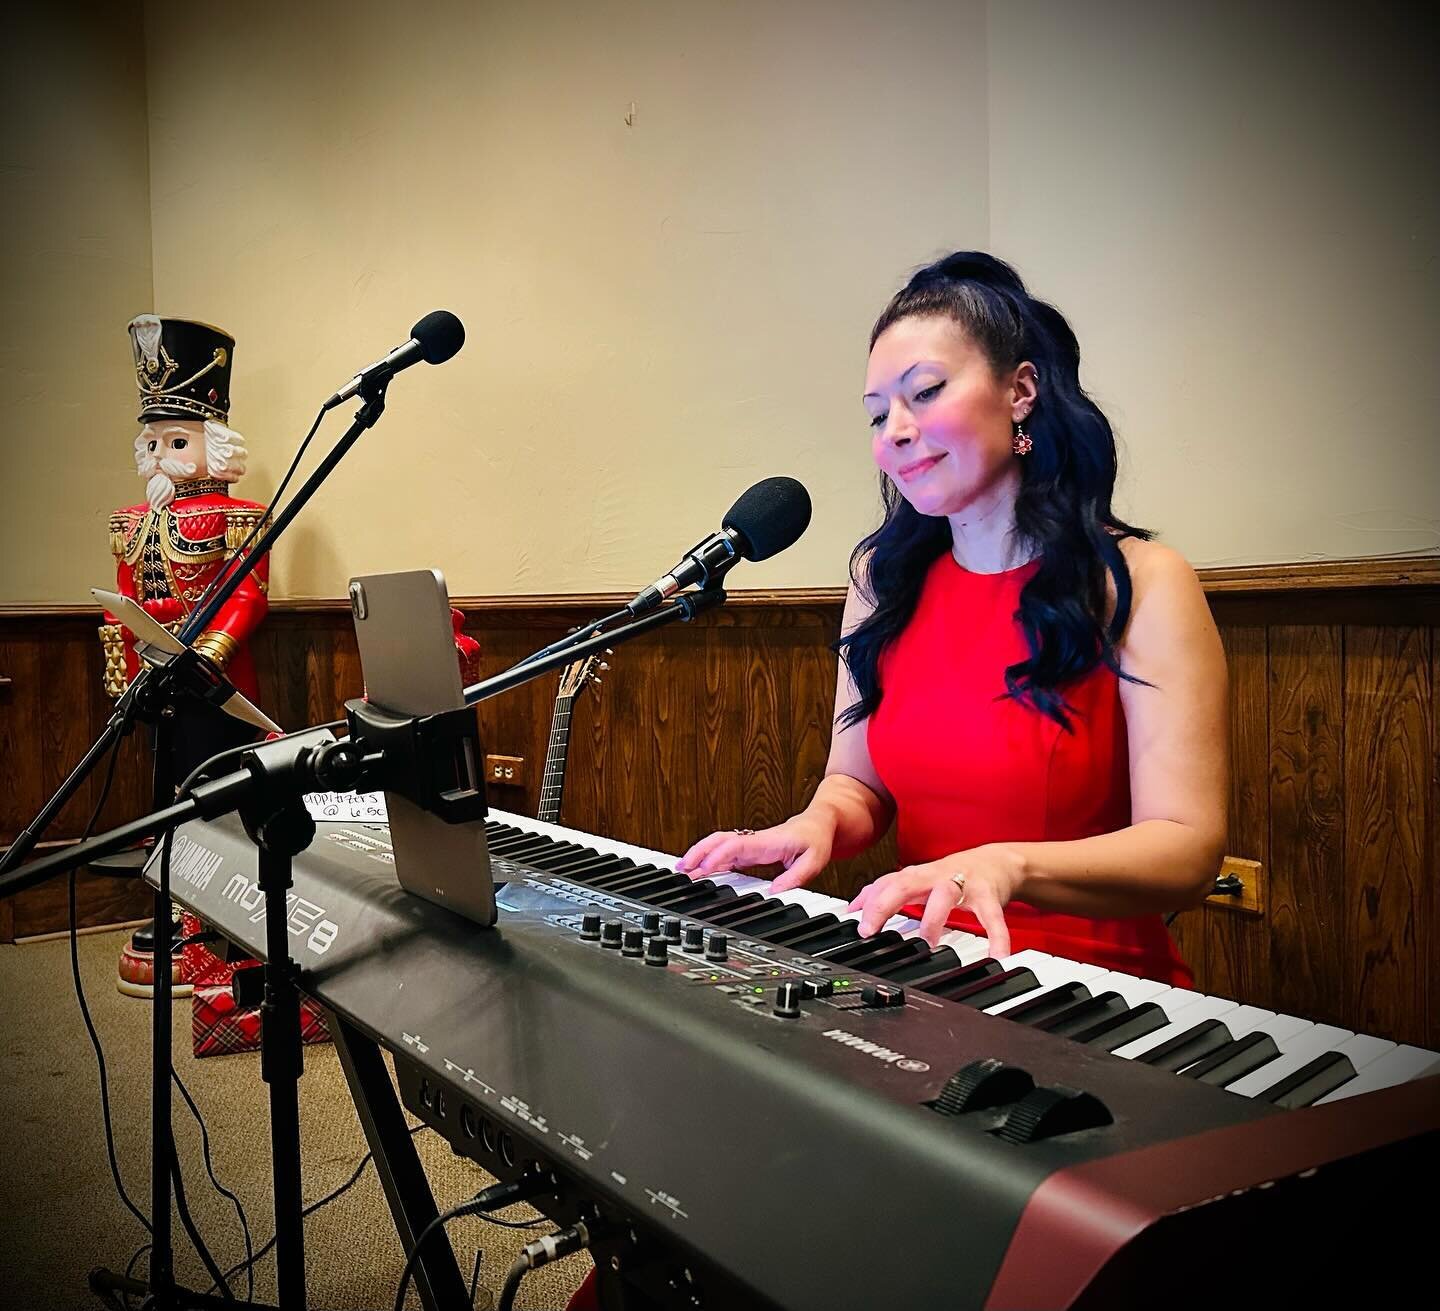 🎶❤️💃🏻 I had the holly, jolliest time playing holiday tunes for the Corsicana Country Club&rsquo;s Christmas Cocktail hour!!! Thank y&rsquo;all for inviting me to perform @corsicanacc. It was such a festive and fantastic night! 🎄
.
.
.
#christmass